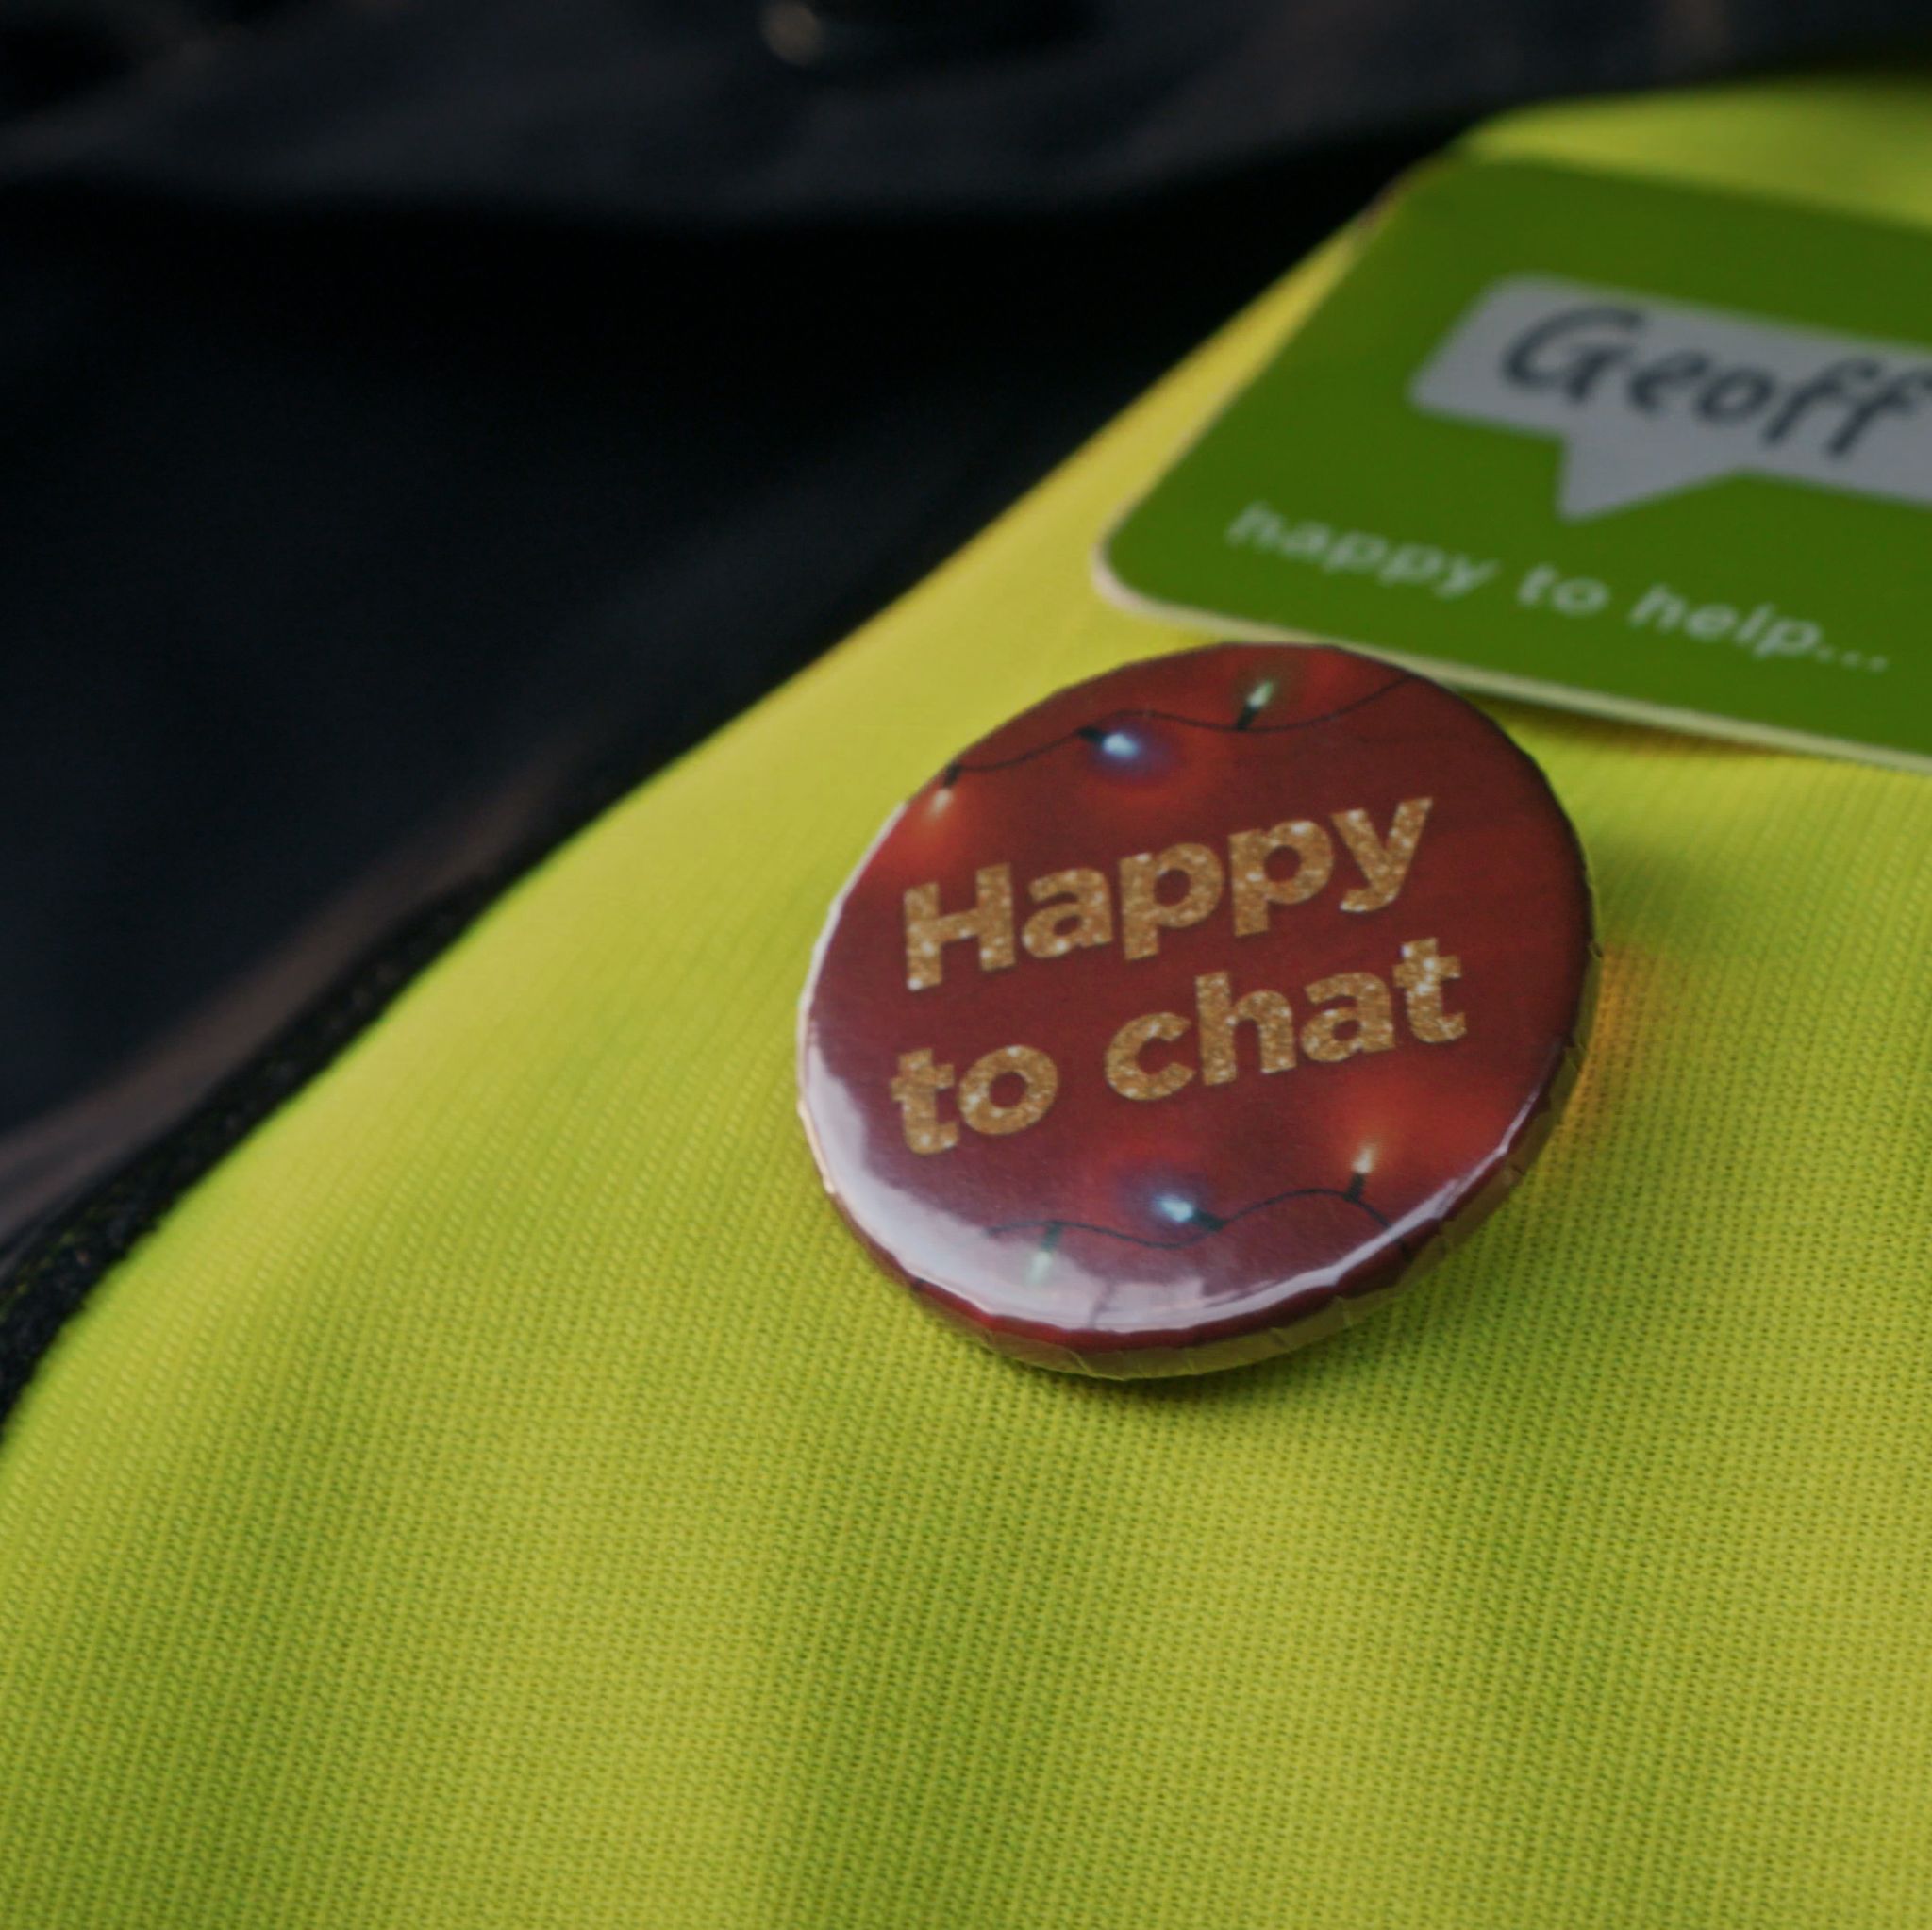 asda delivery drivers combat christmas loneliness with 'happy to chat' badges